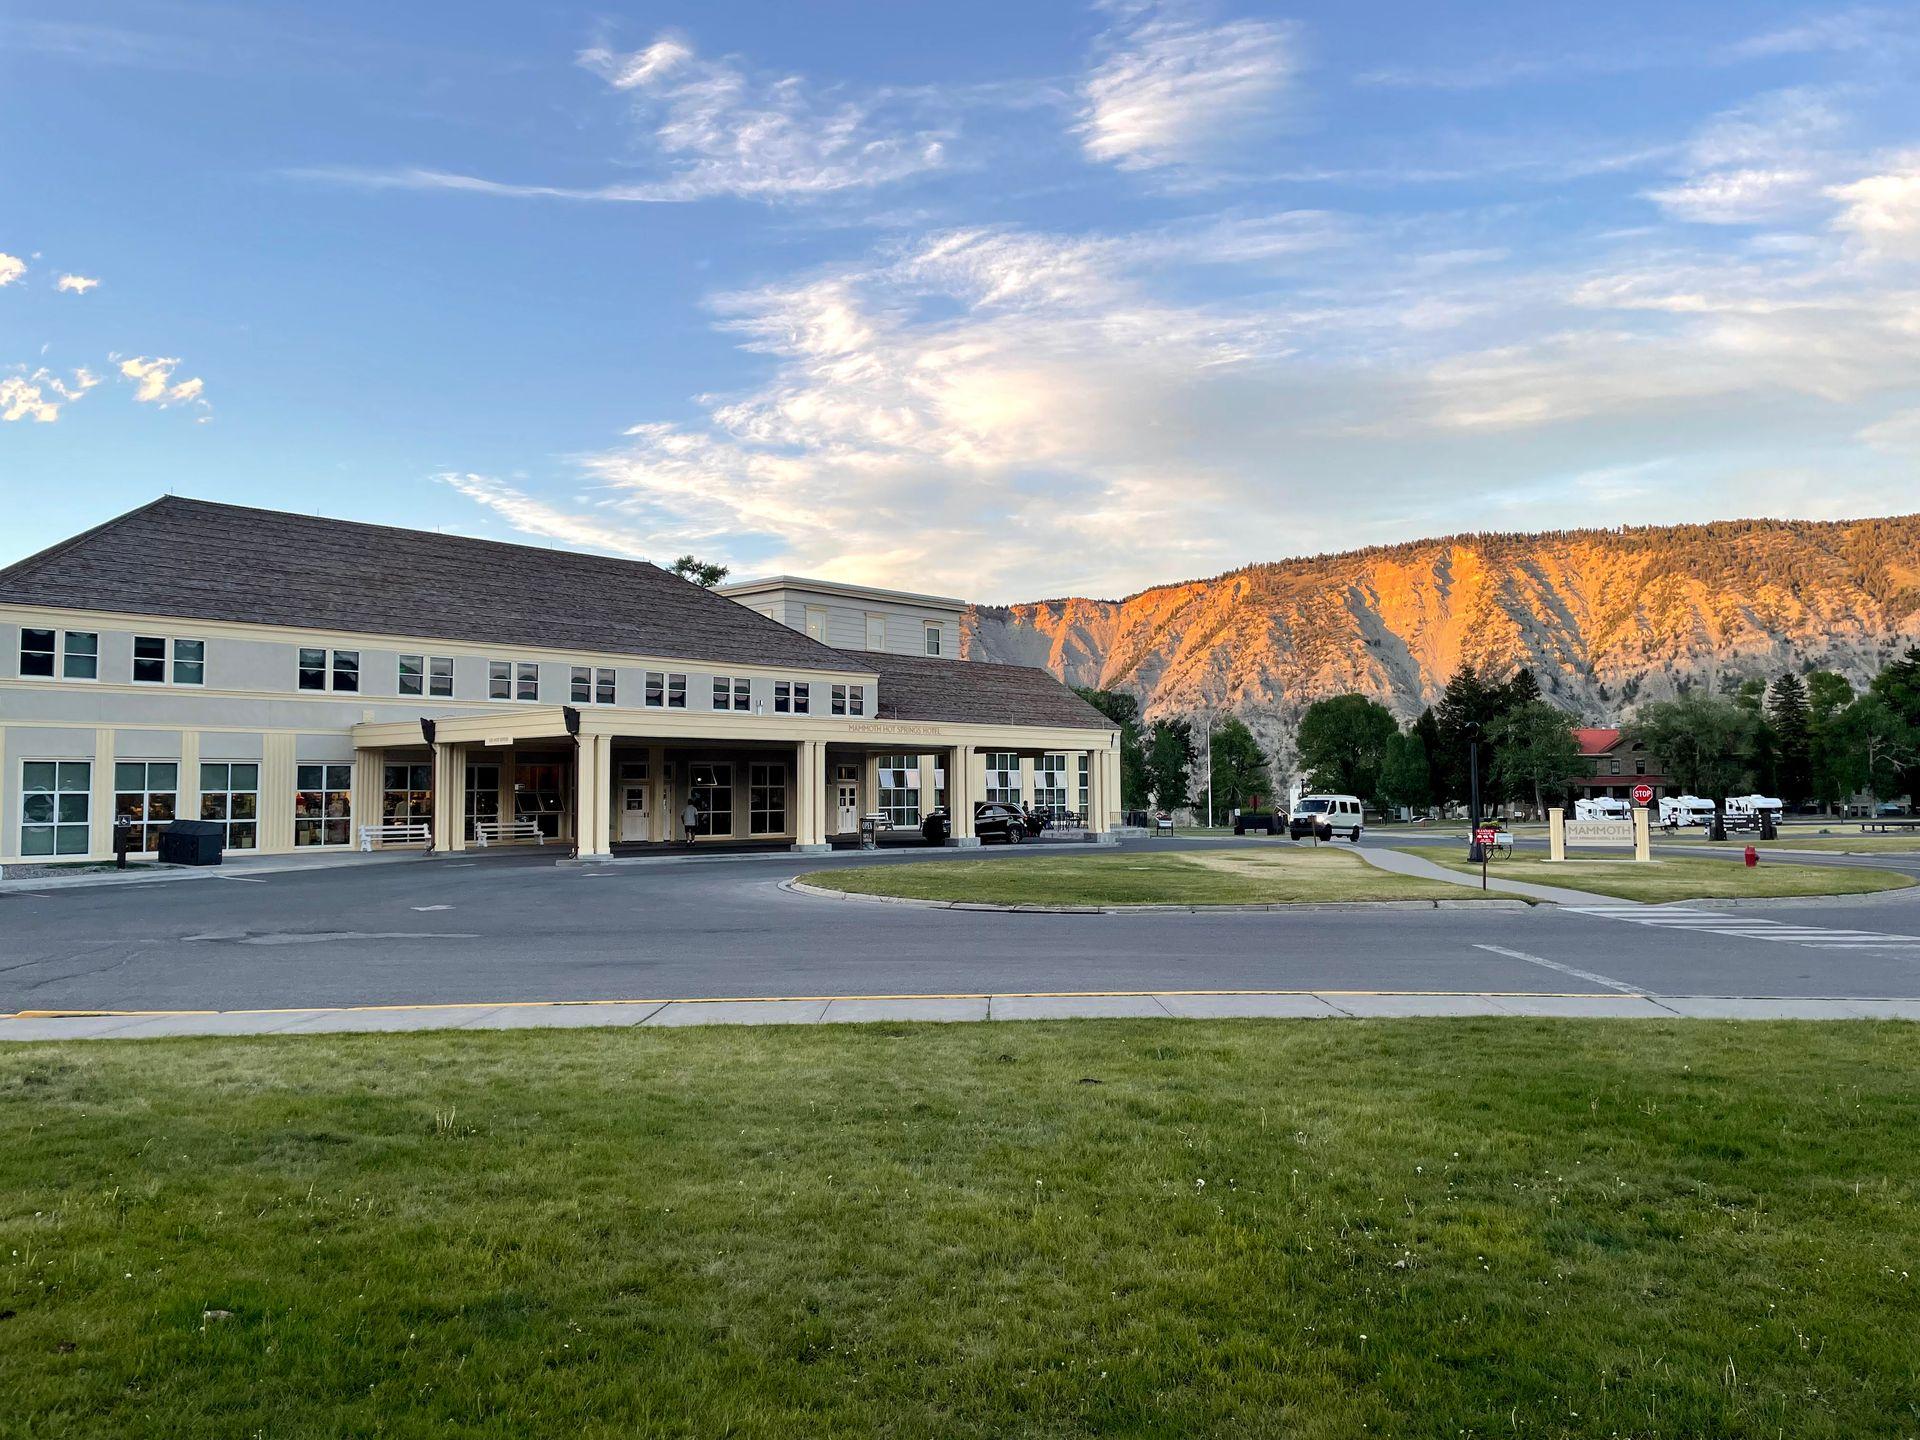 The exterior of the Mammoth Hot Springs Hotel with mountains glowing orange in the background.